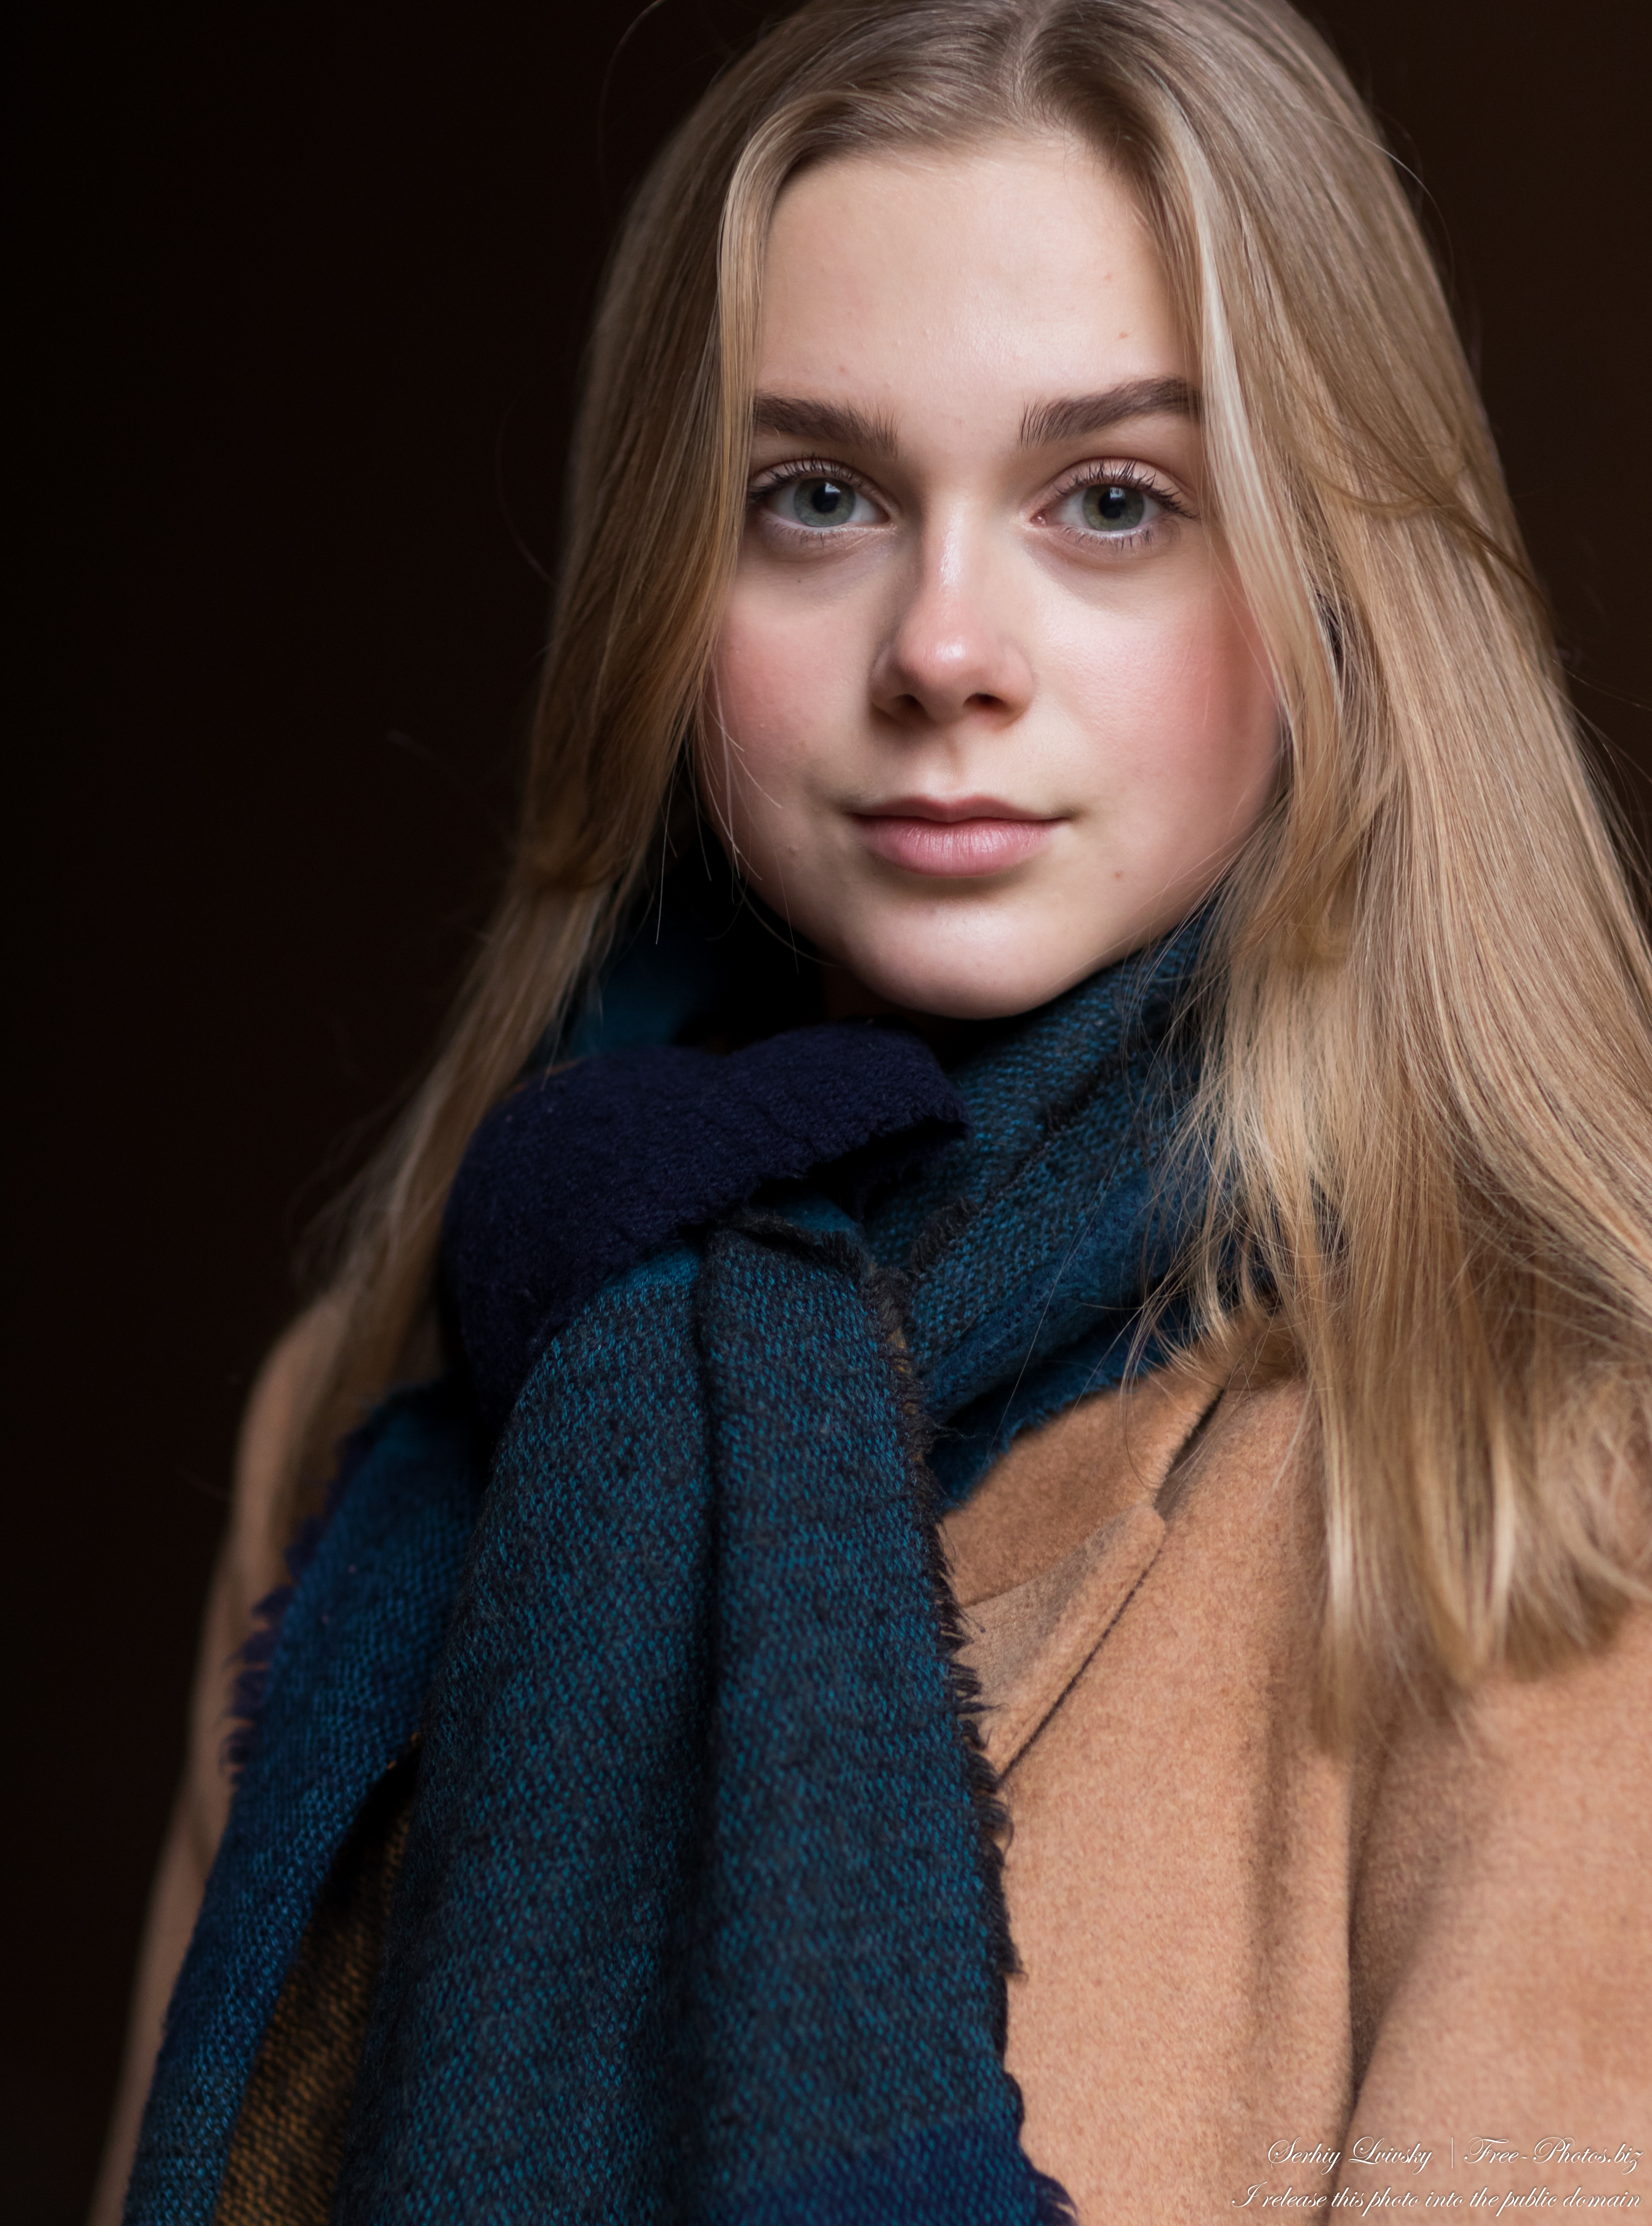 Emilia - a 15-year-old natural blonde Catholic girl photographed in November 2020 by Serhiy Lvivsky, picture 25